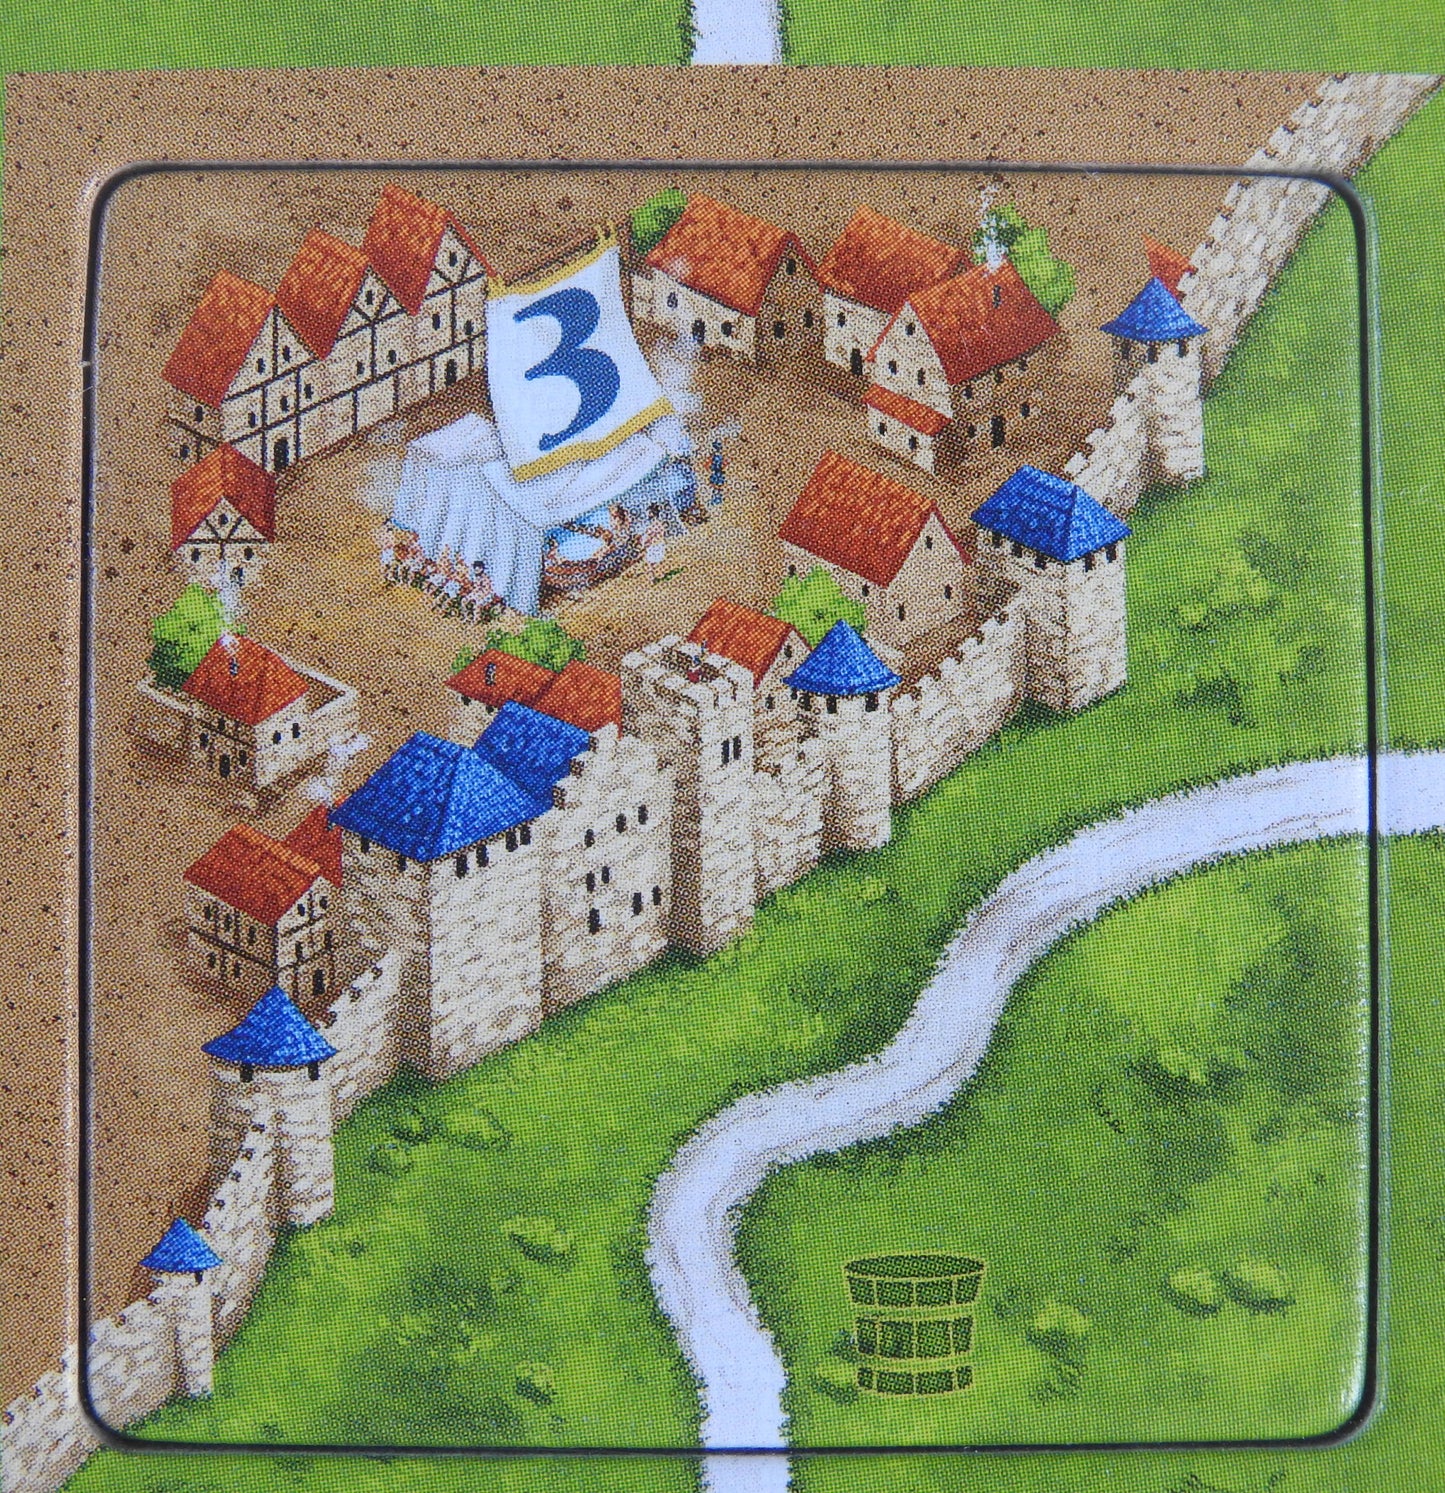 Close-up of one of the Barber Surgeons tiles, showing houses and a marqueee in the city.